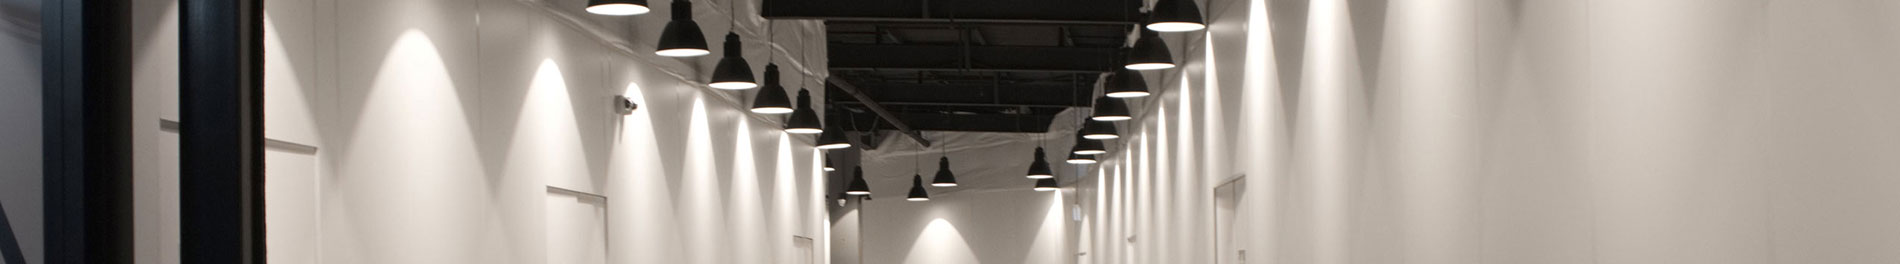 suspended ceilings banner